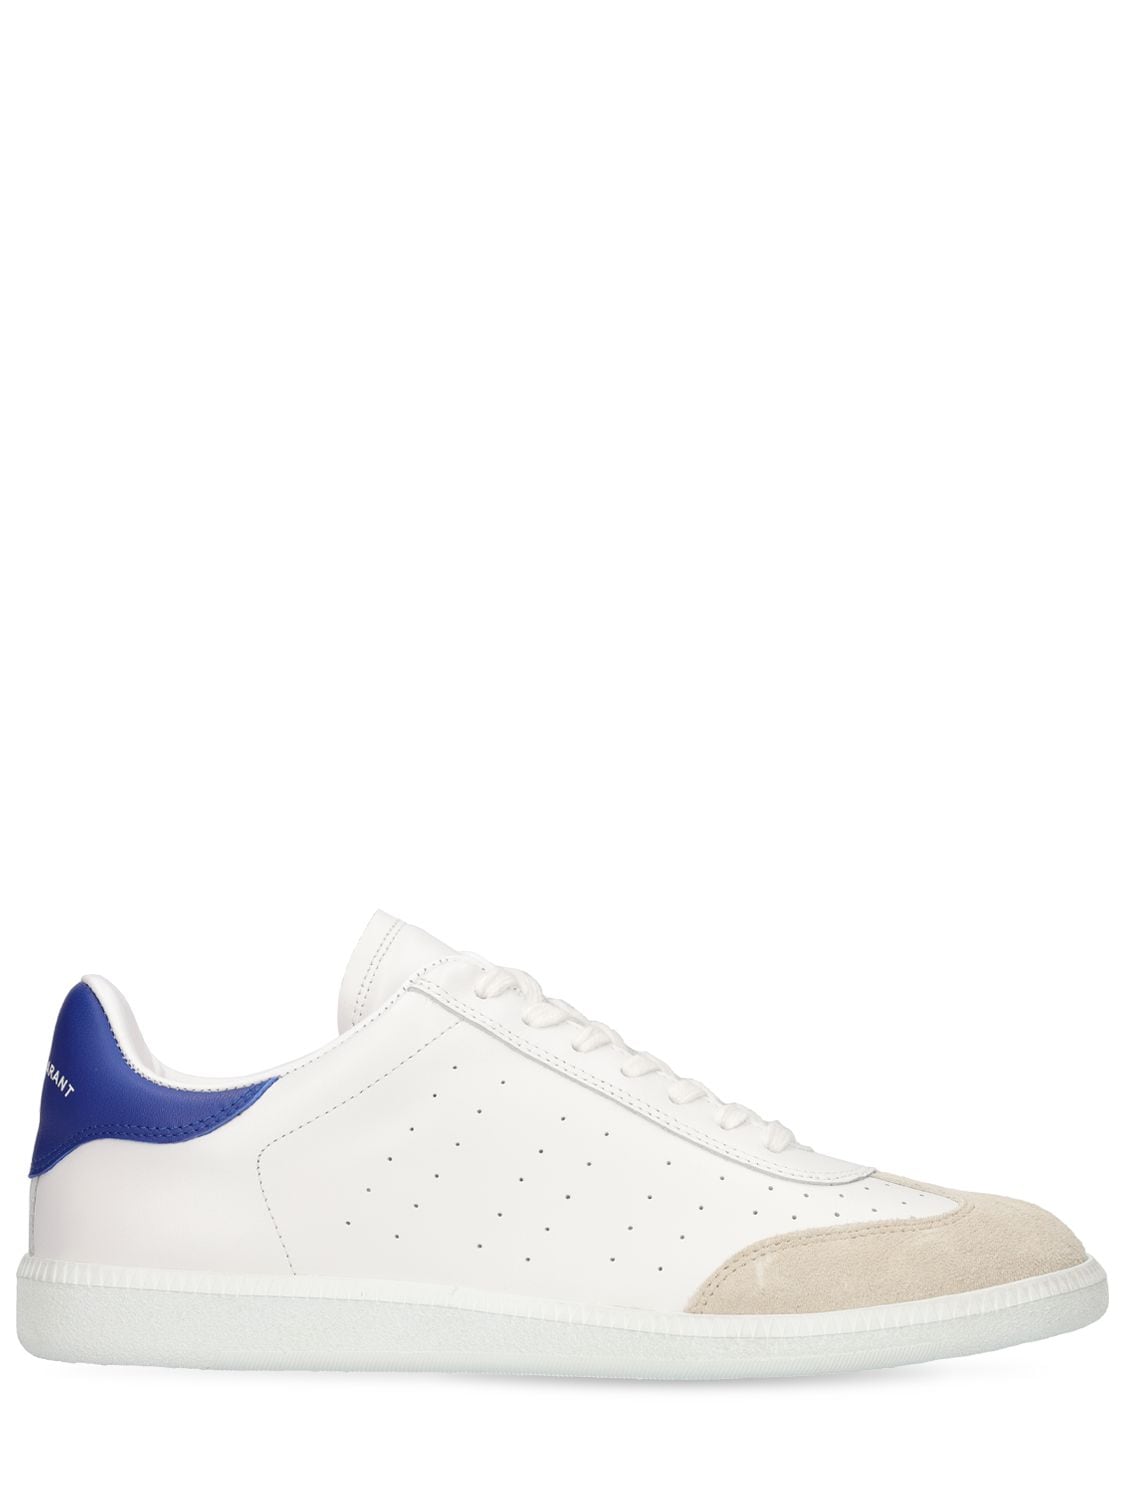 ISABEL MARANT BRYCY LEATHER LOW TOP SNEAKERS